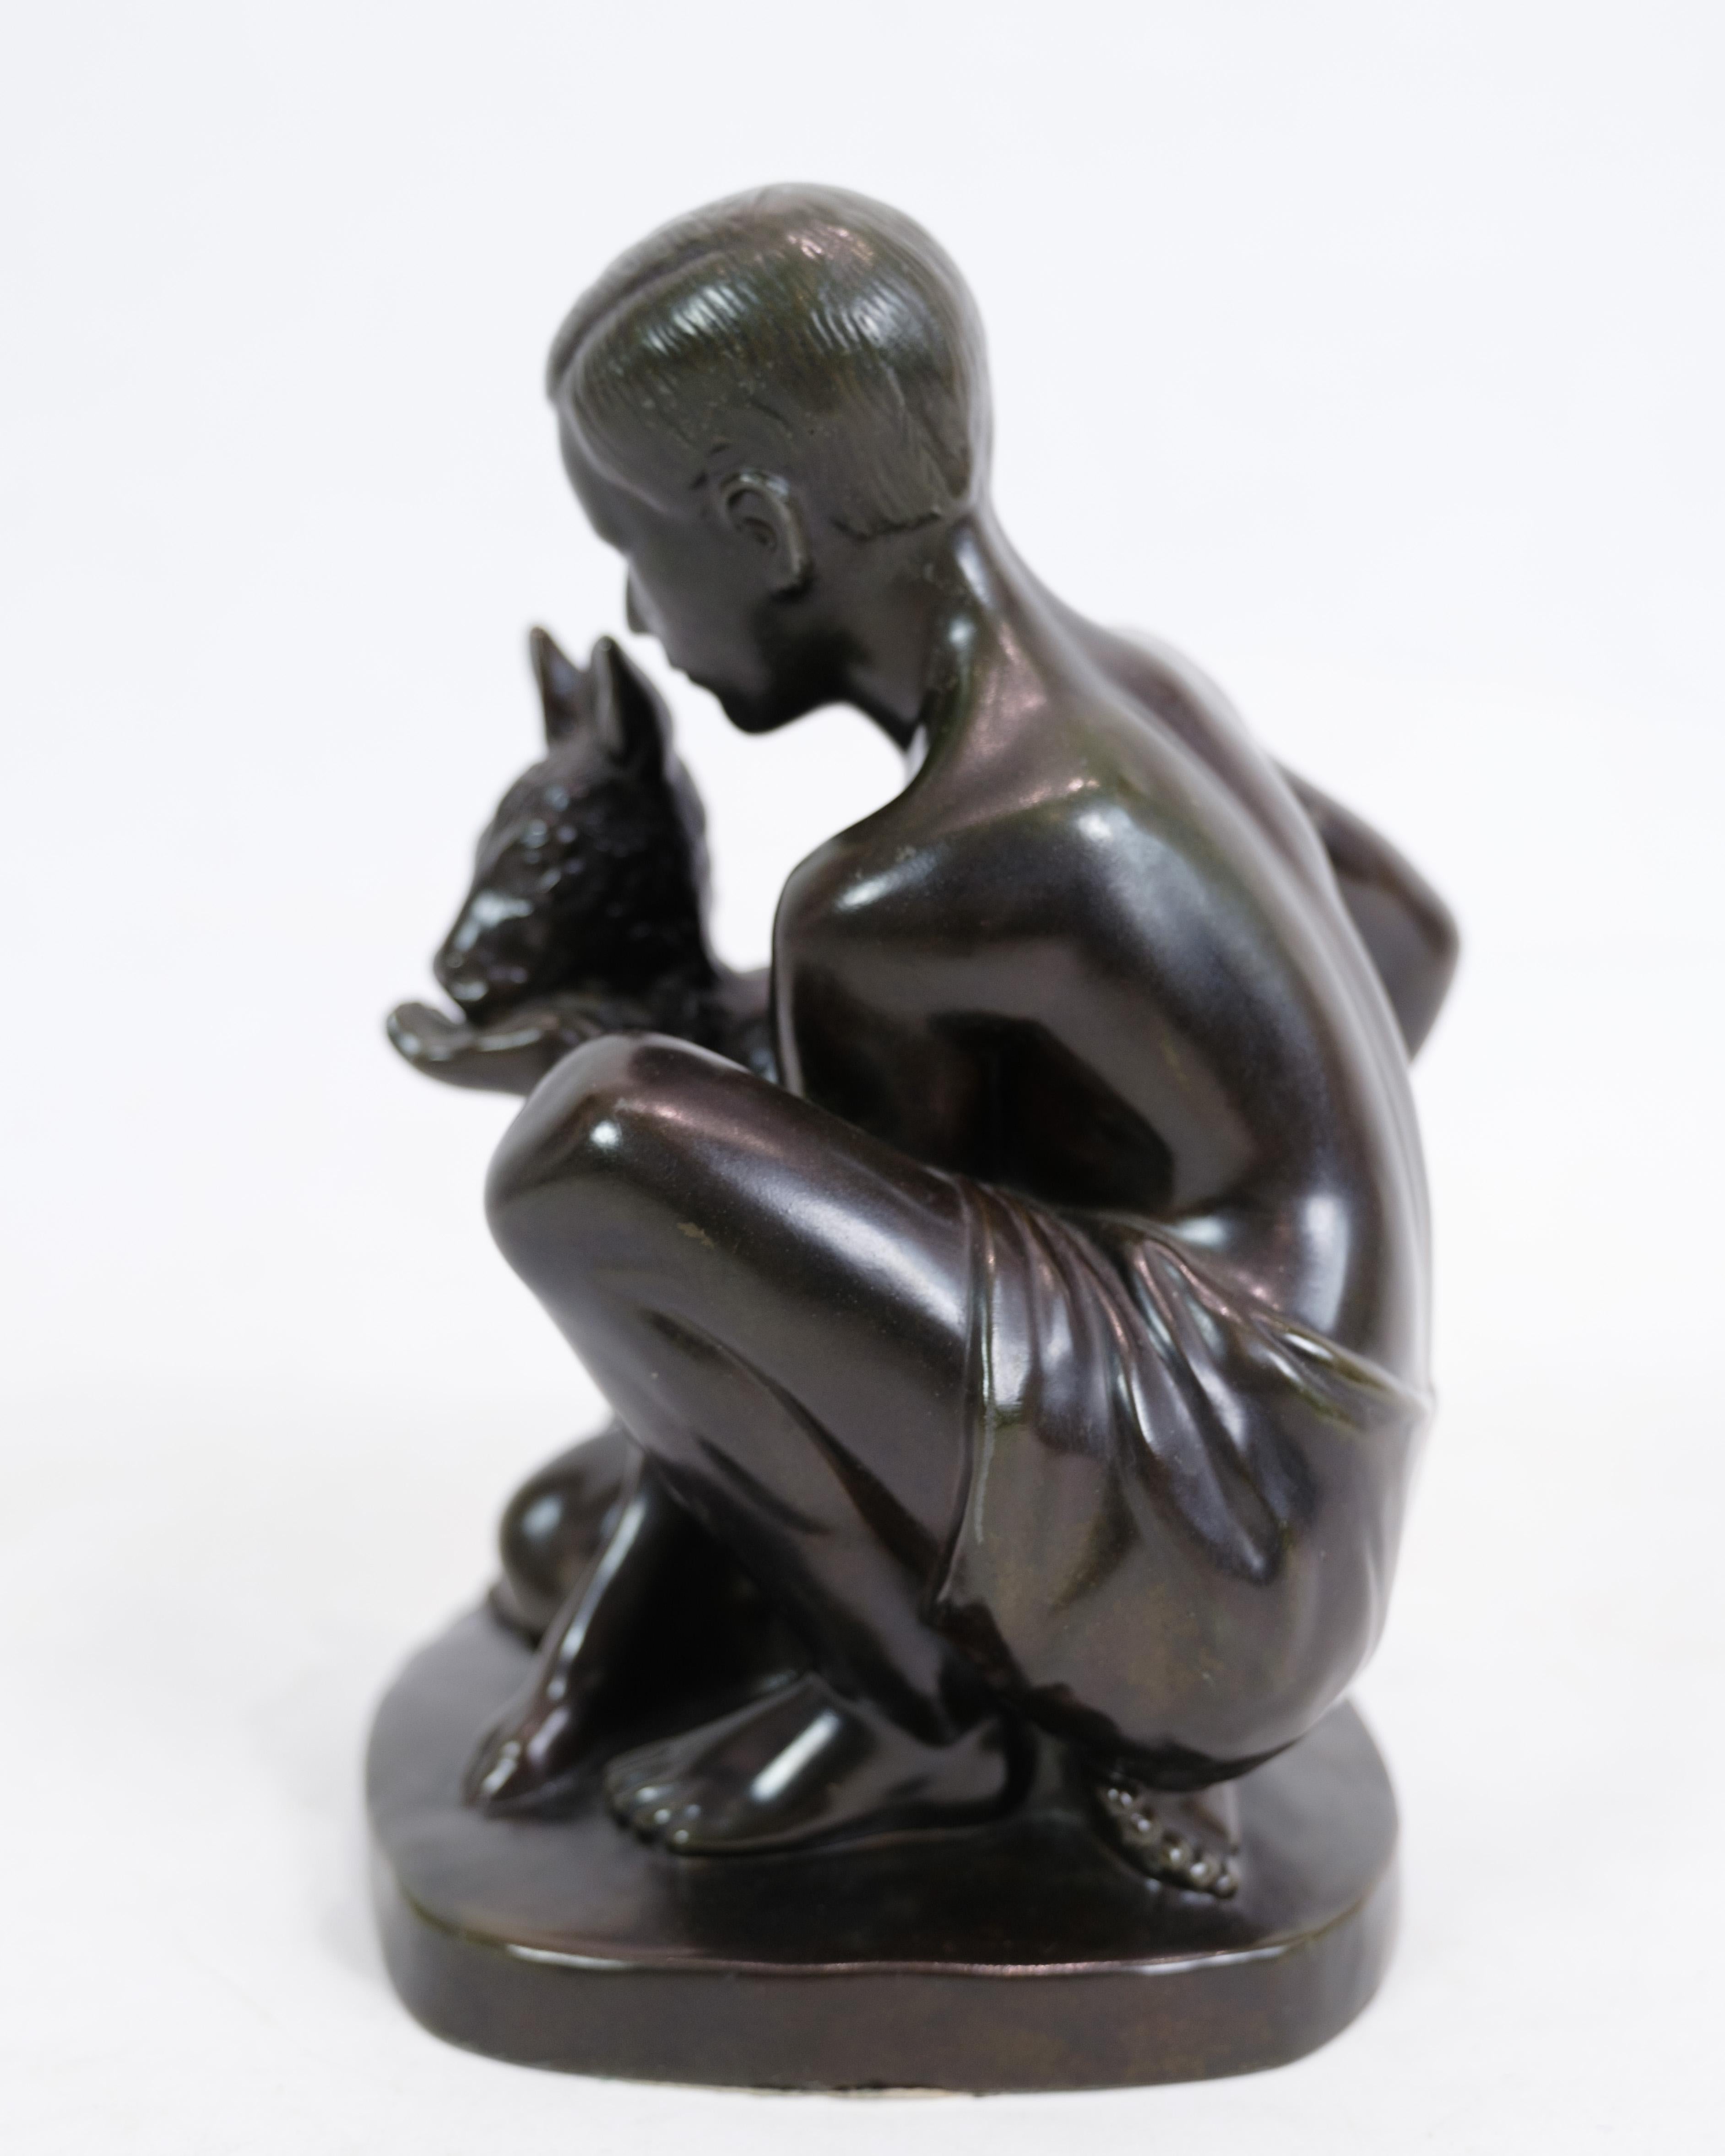 The figure by Just Andersen depicts a beautifully crafted sculpture featuring a boy and a deer kid motif. It is identified by the model name Just A D2318. This sculpture exudes a certain simplicity while also possessing subtle complexity in its